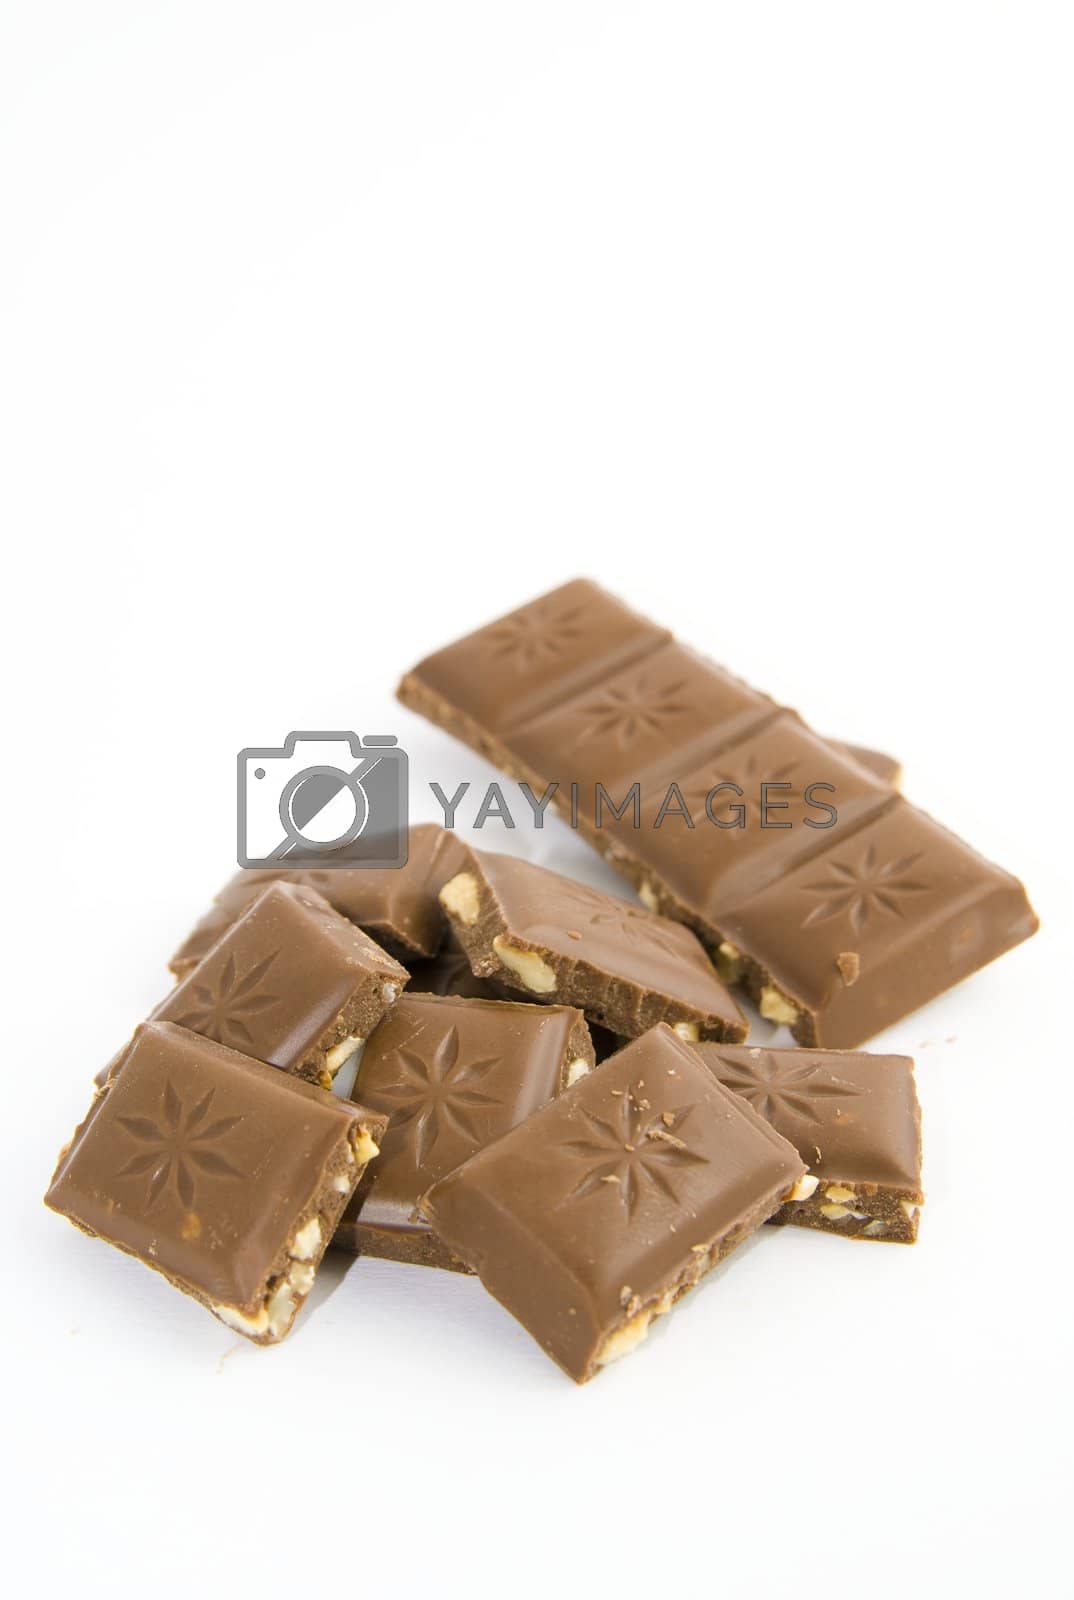 Royalty free image of Heap of chocolate by pmisak